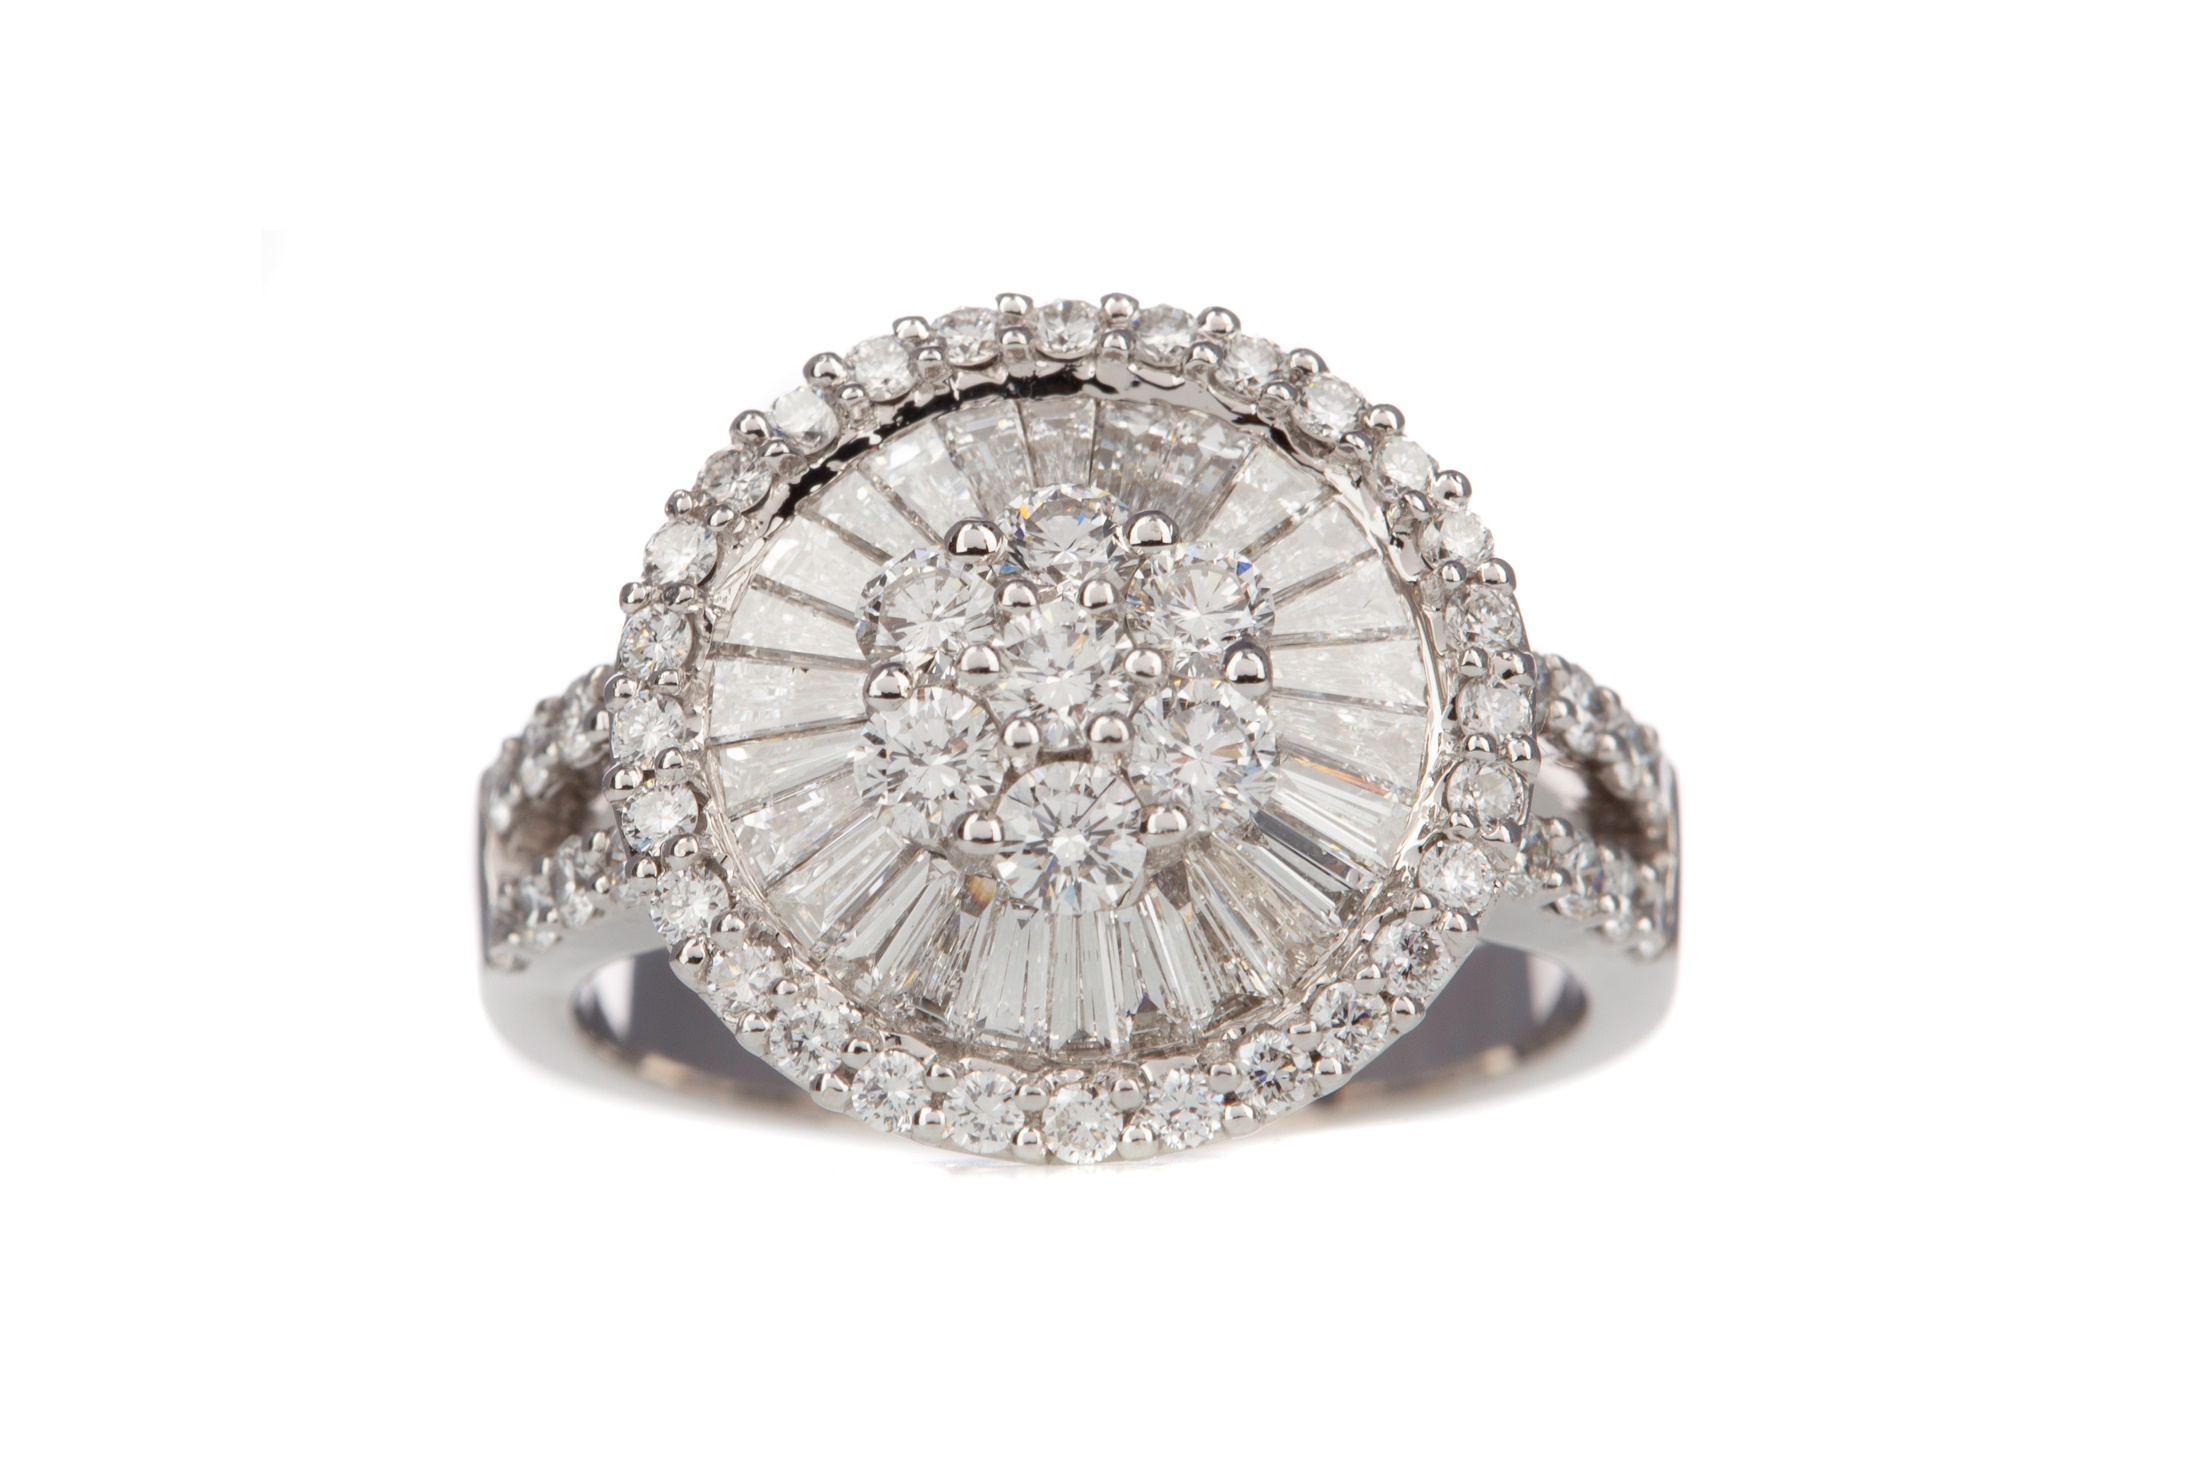 A CERTIFICATED DIAMOND CLUSTER RING